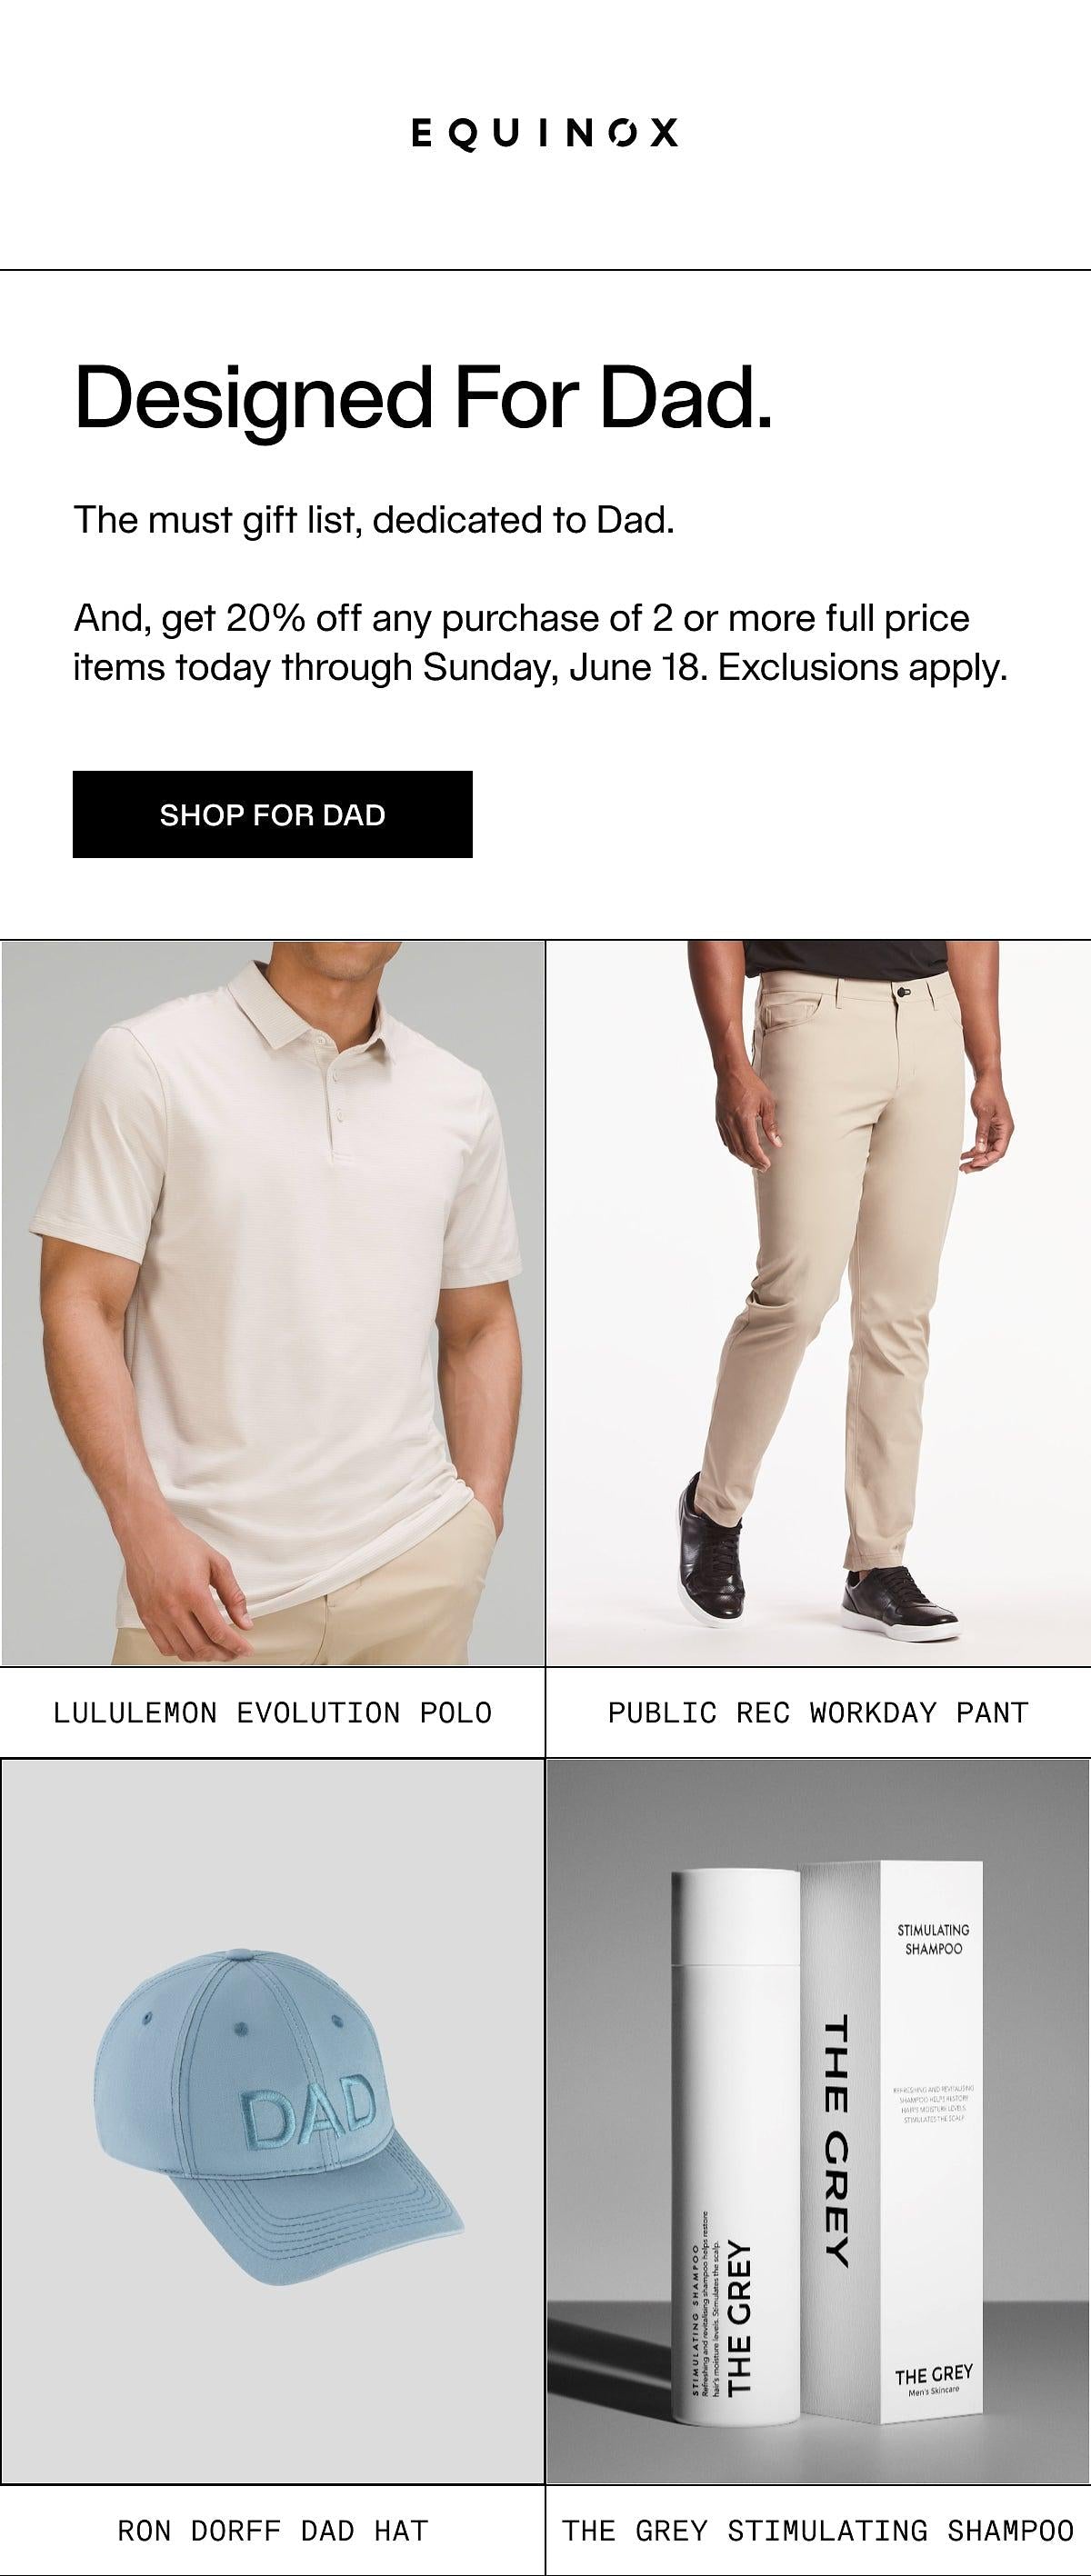 Designs for Dad. Get 20% off 2+ full price items at Equinox